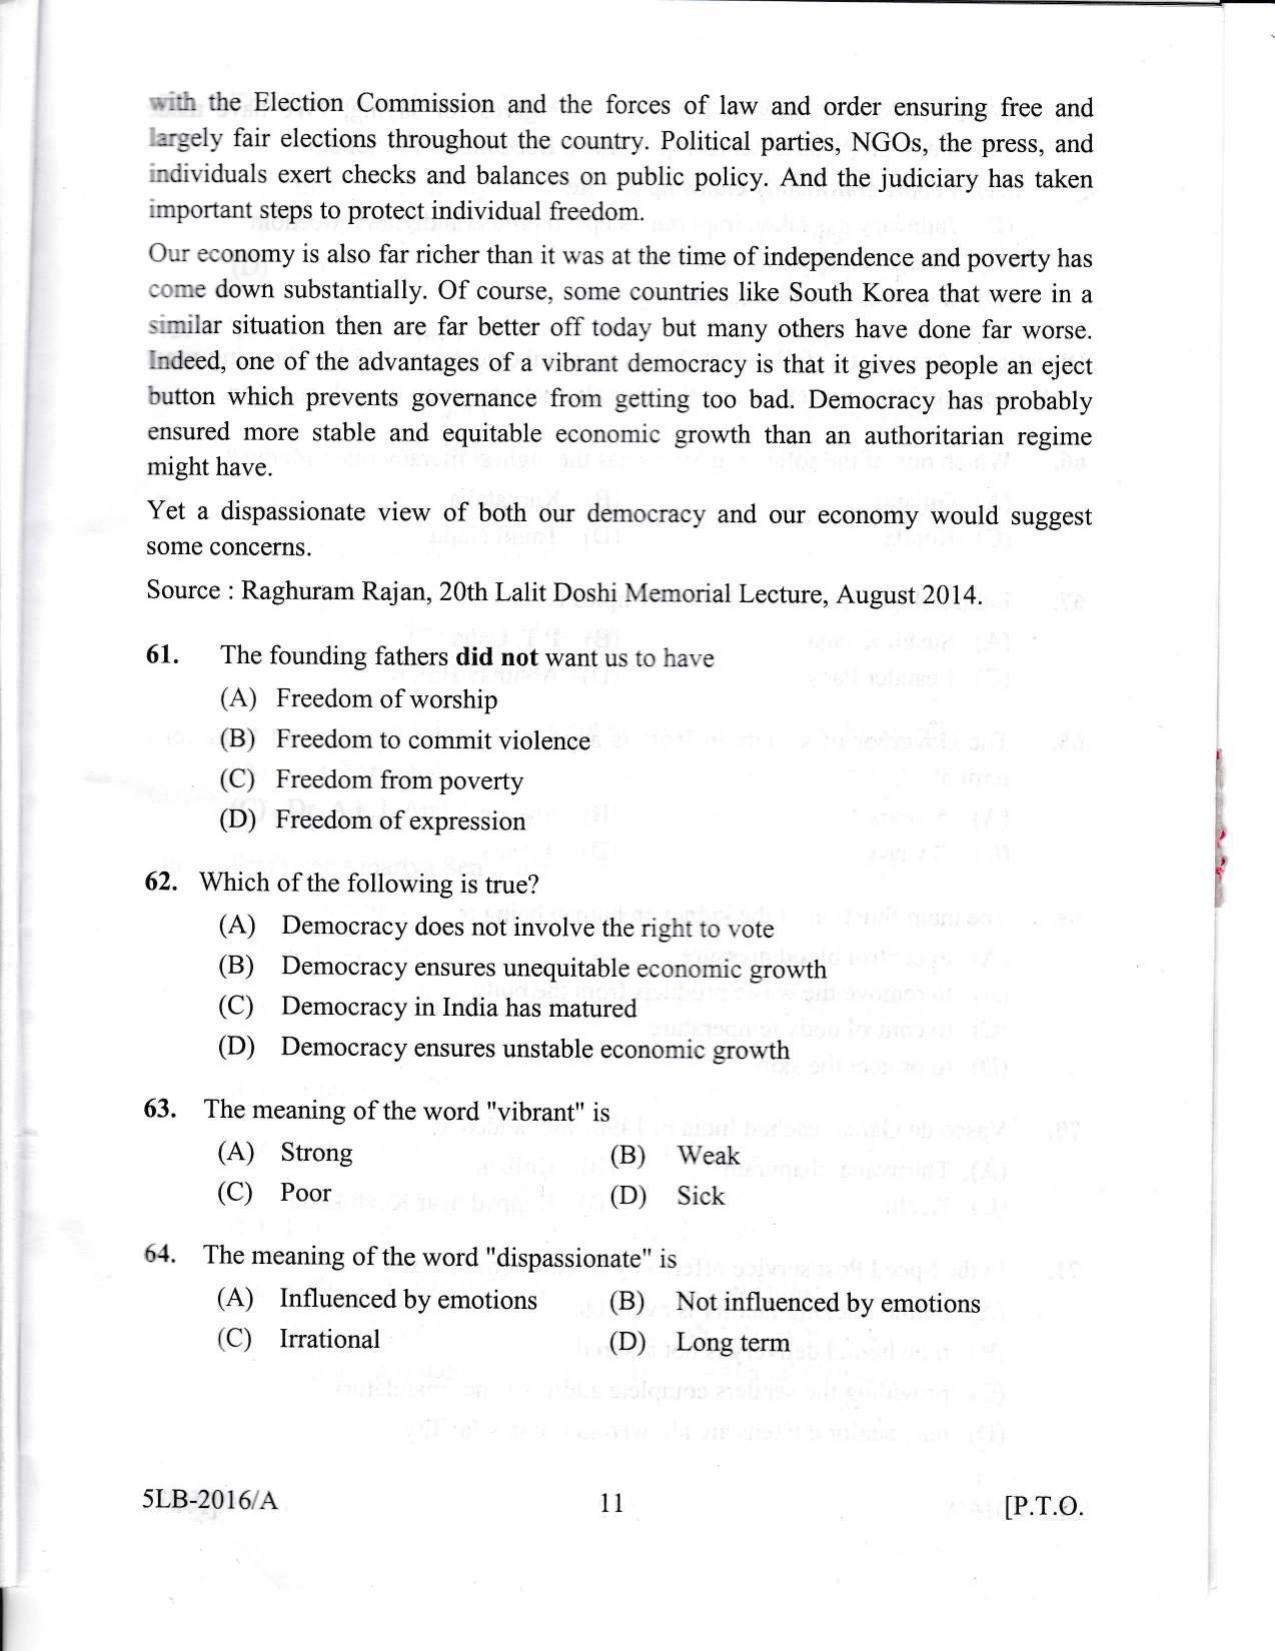 KLEE 5 Year LLB Exam 2016 Question Paper - Page 11